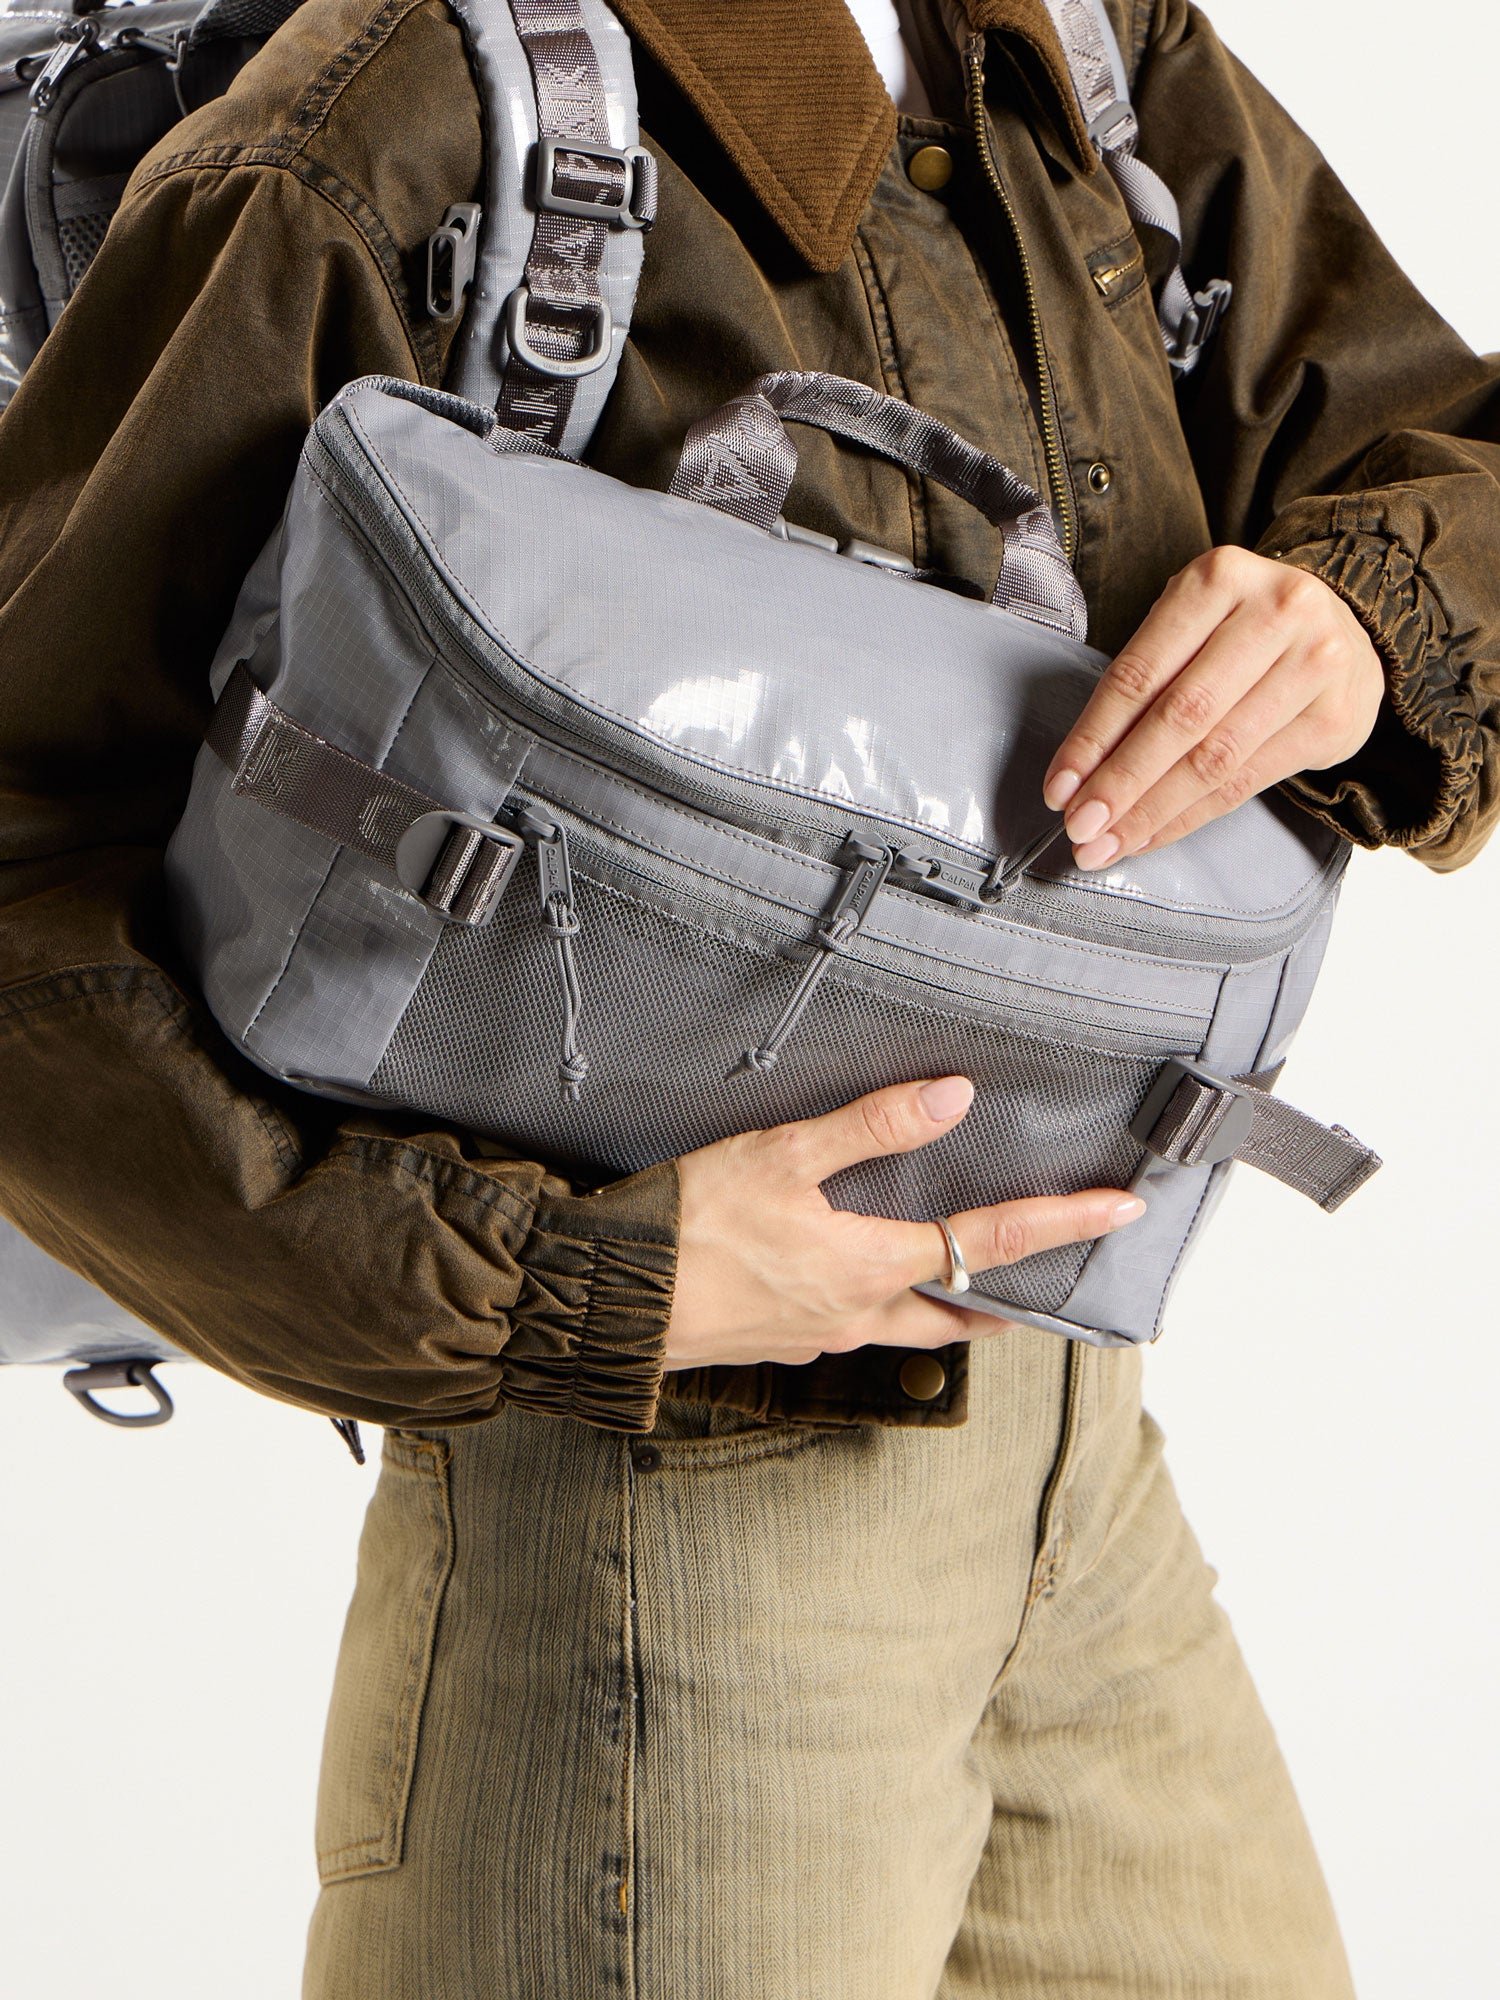 Model showing main zippered compartment of CALAPK Terra Sling Bag in gray